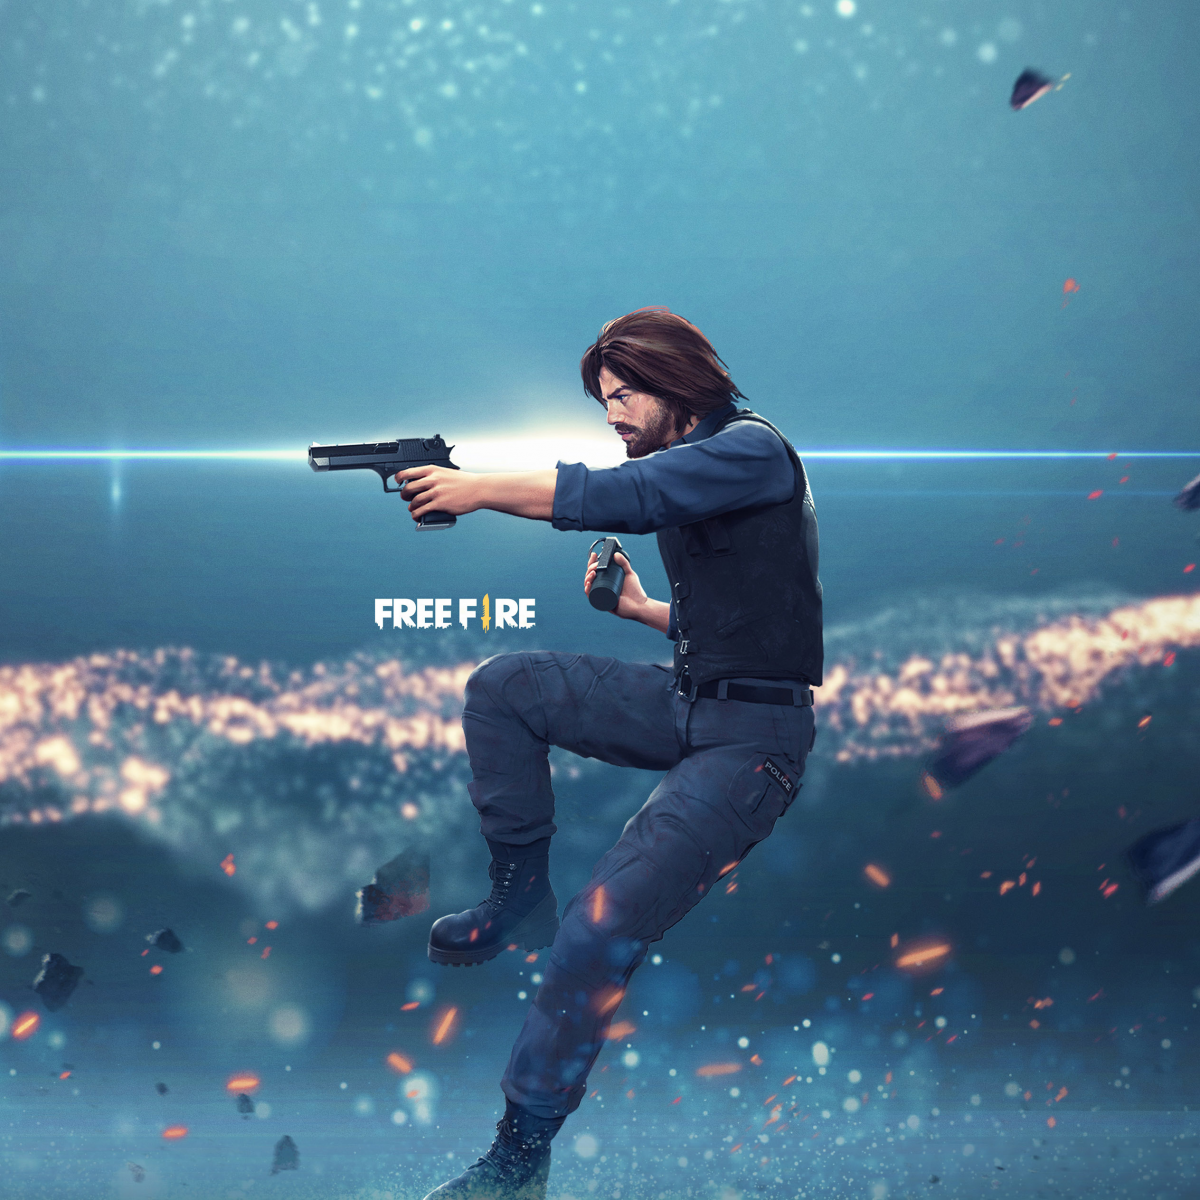 free fire profile pic wallpapers wallpaper cave on free fire profile pic wallpapers